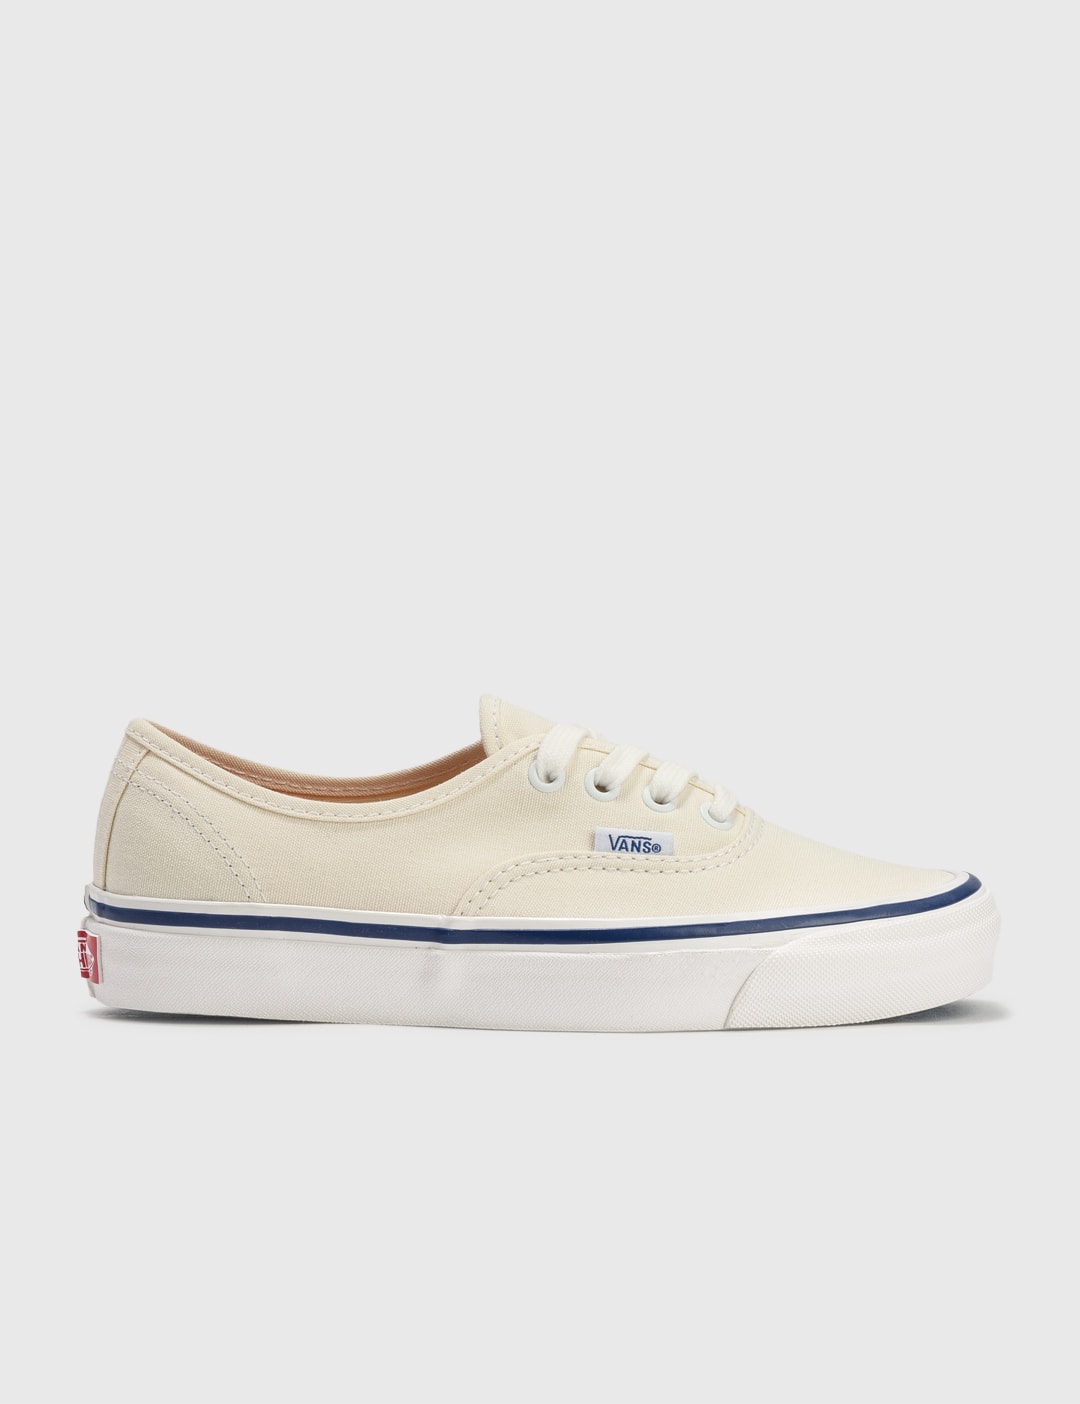 Vans - Authentic 44 Deck DX | HBX - Globally Curated Fashion and ...